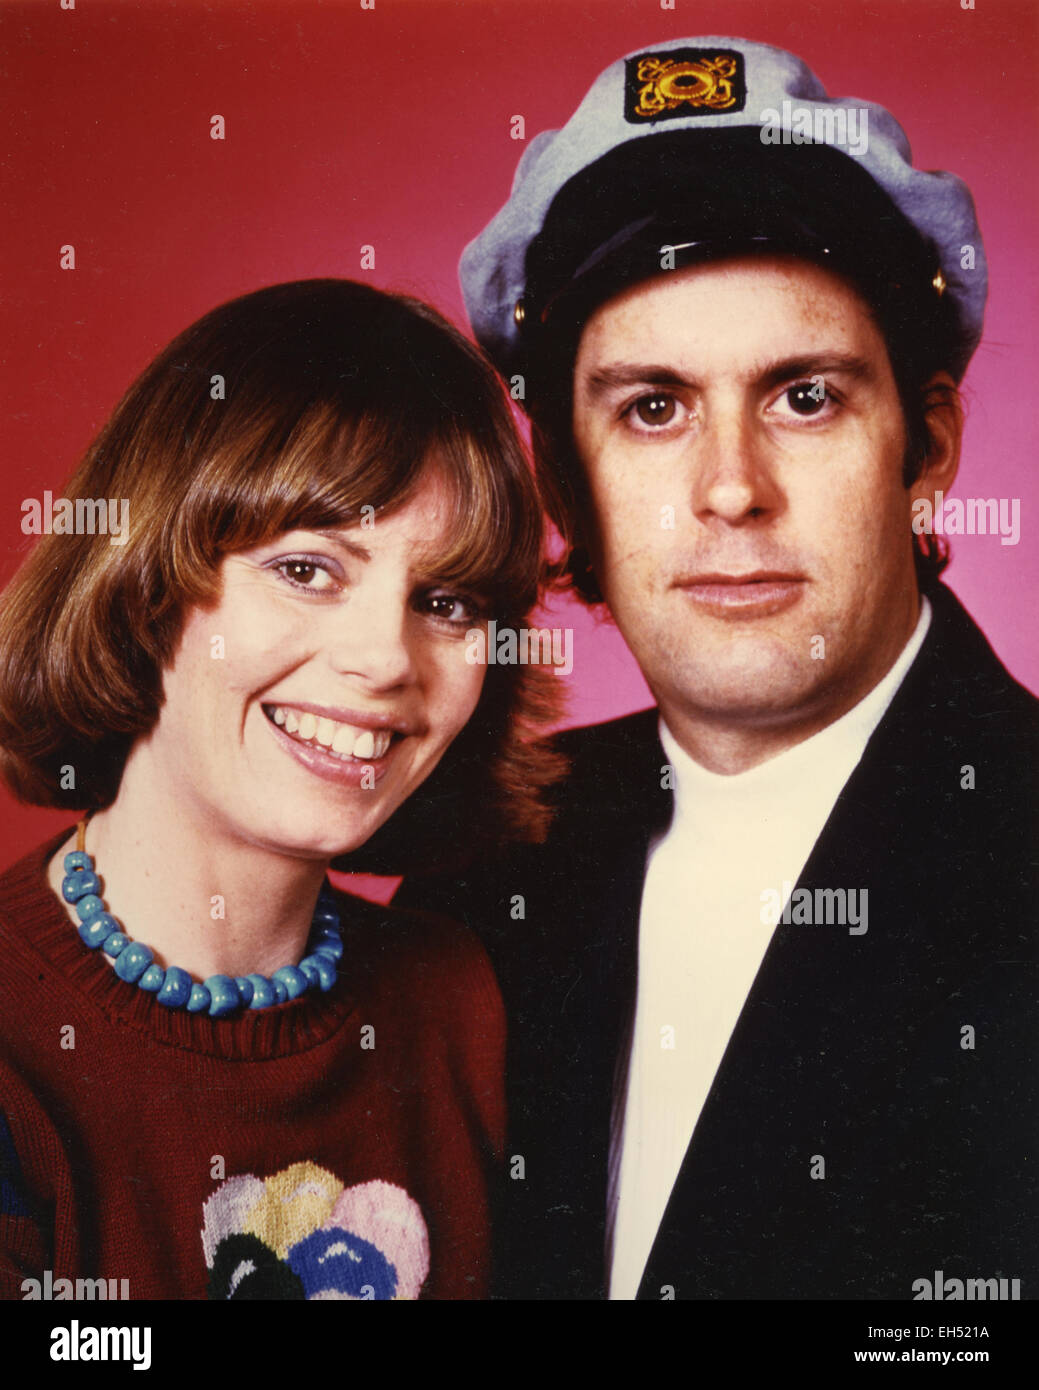 CAPTAIN AND TENNILLE  Promotional photo of US pop music husband and wife duo of Daryl Dragon and Cathryn Tennille about 1976 Stock Photo